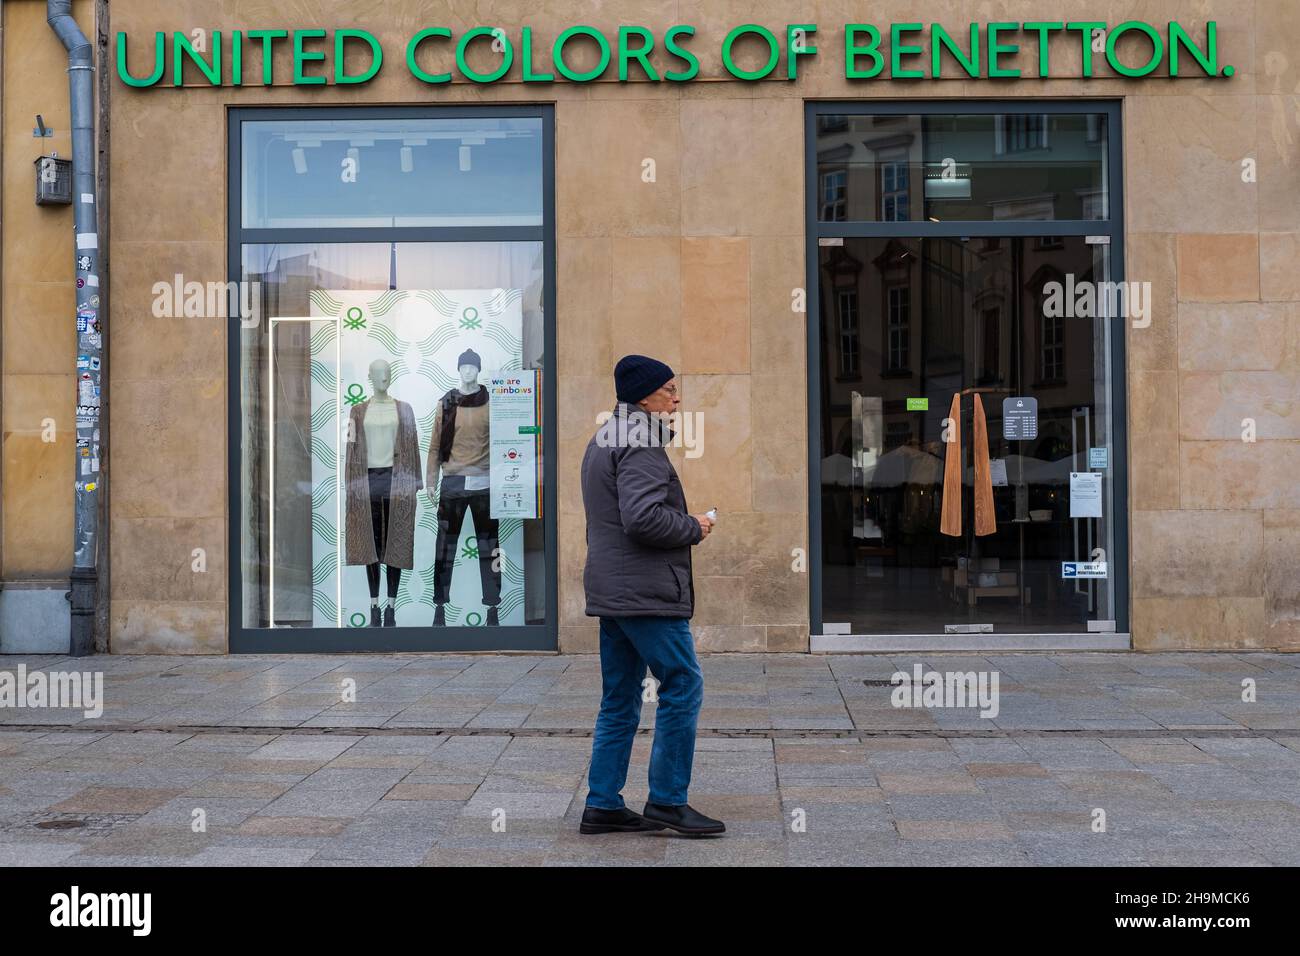 United Colors of Benetton retail clothing store, shop entrance with people,  people on street sidewalk, windows and clothes on display Stock Photo -  Alamy